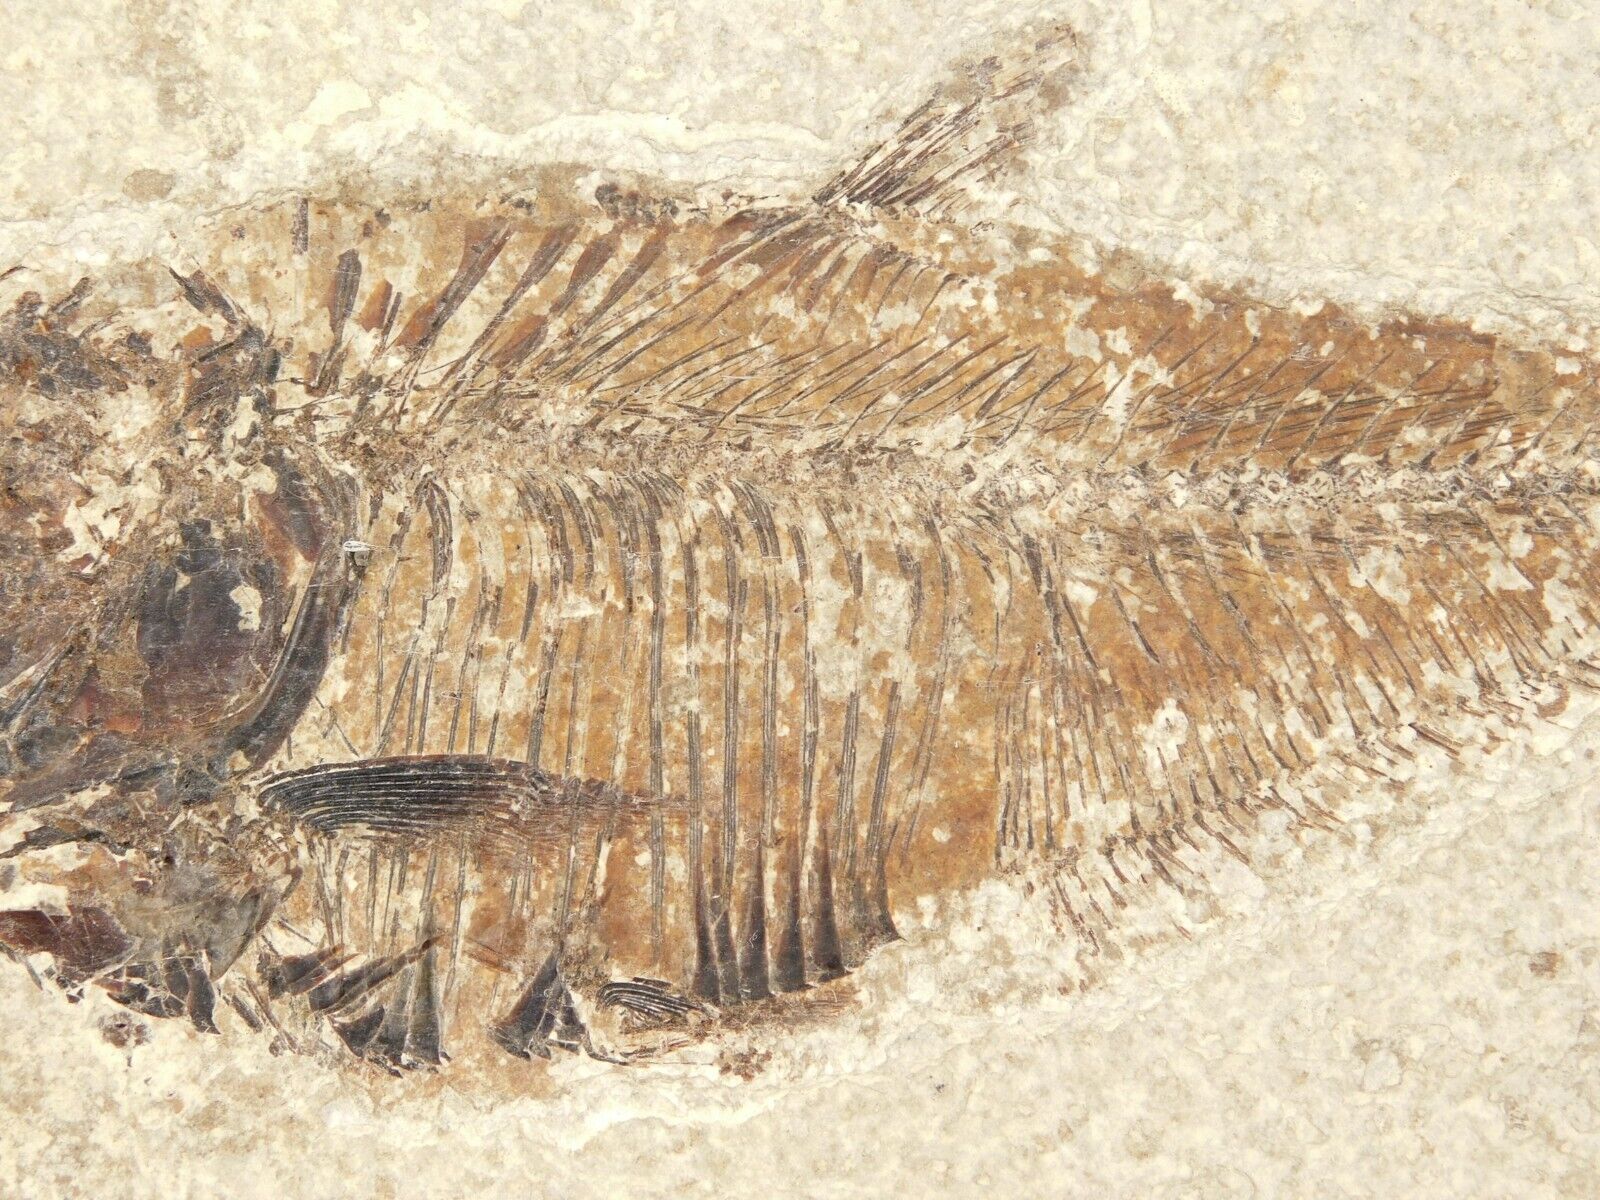 50 Million Year Old! Diplomystus FISH Fossil With Stand From Wyoming 467gr